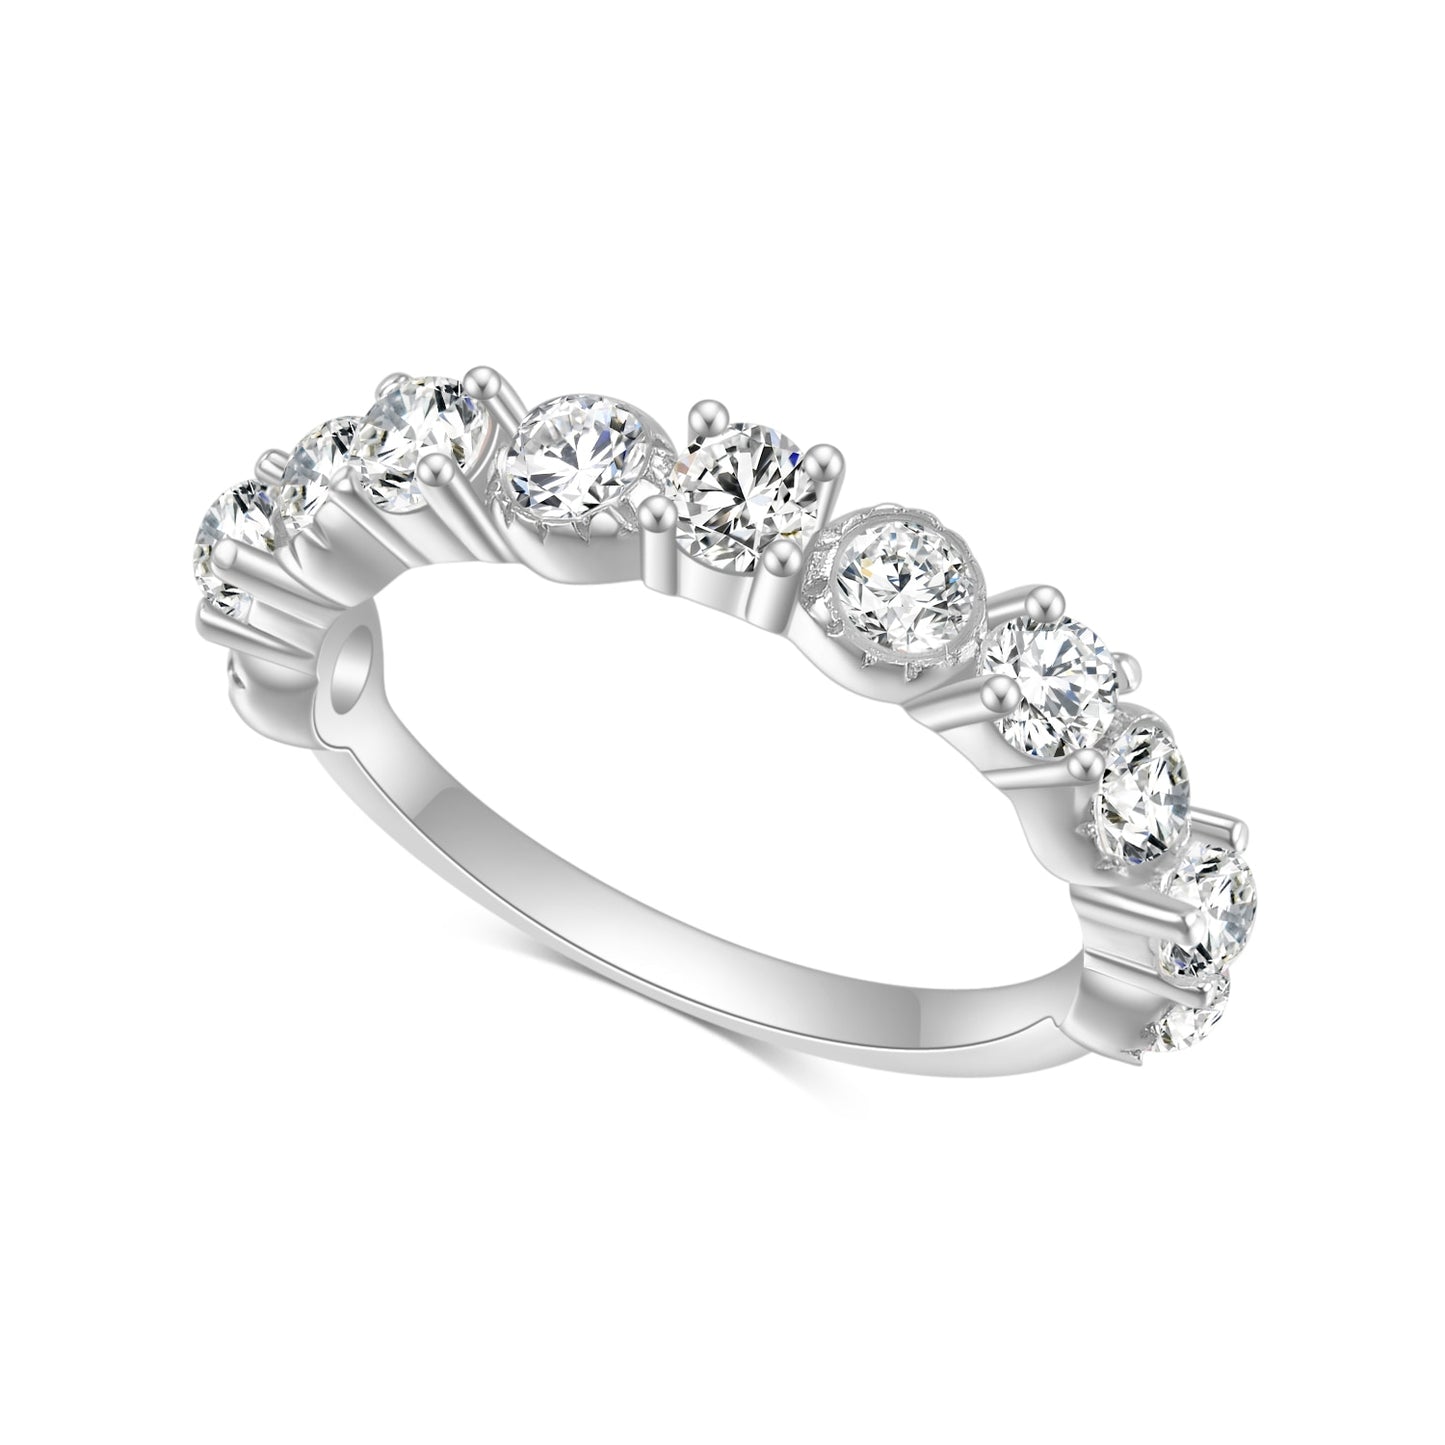 A silver wedding ring set with round moissanites, alternating between prong and bezel set.